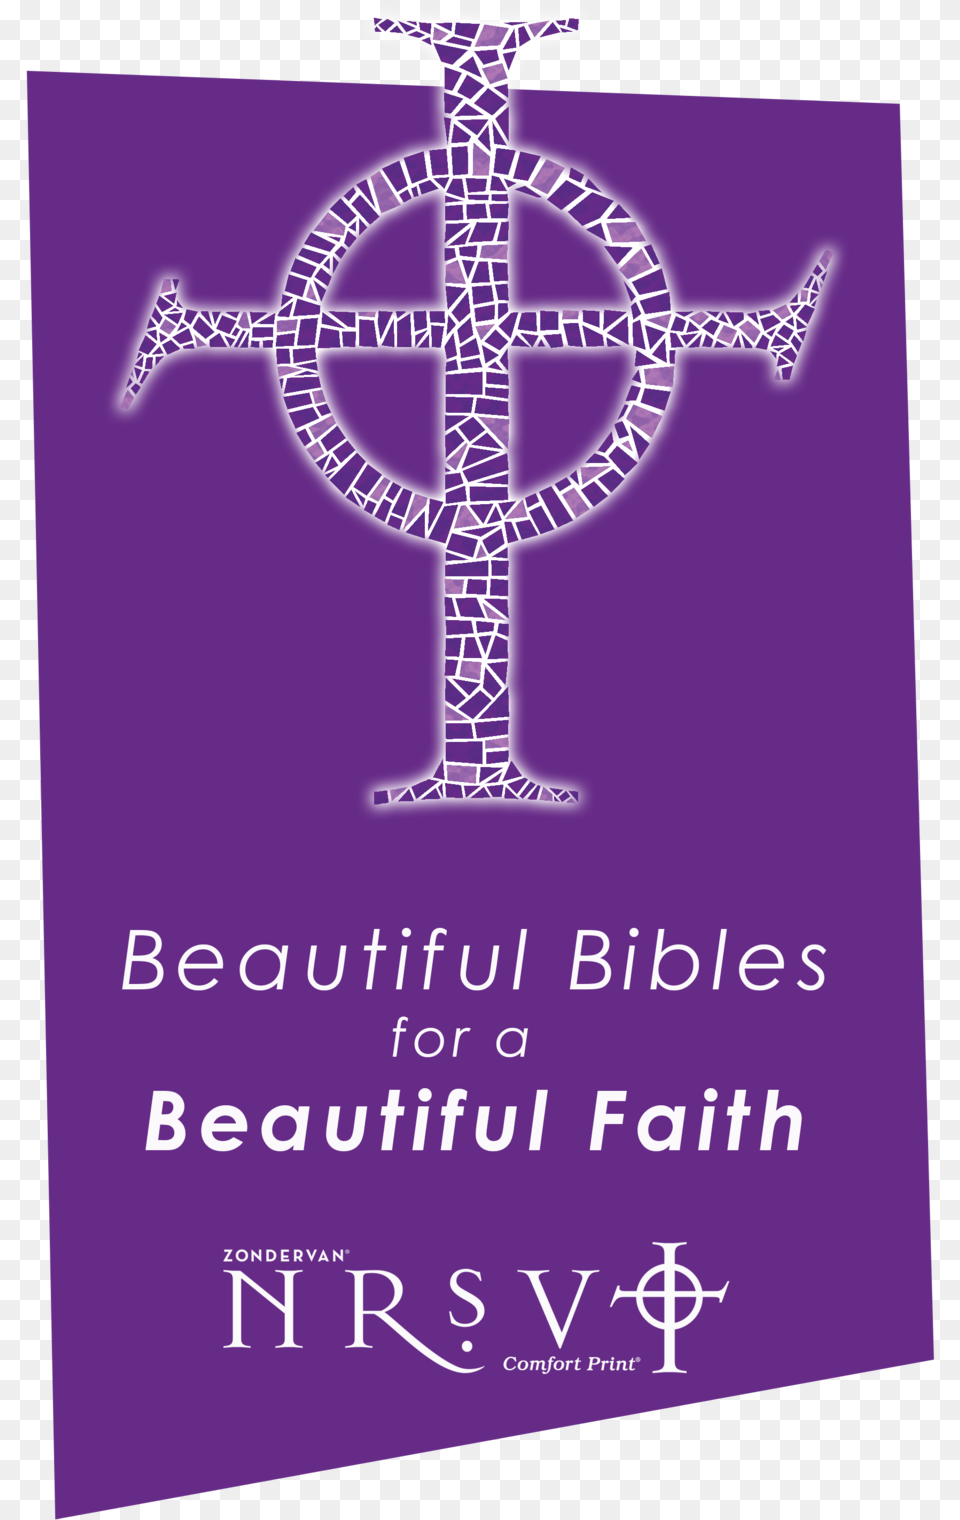 Why Christian Vertical Christian New Years Divider Cross, Symbol, Book, Publication Free Png Download